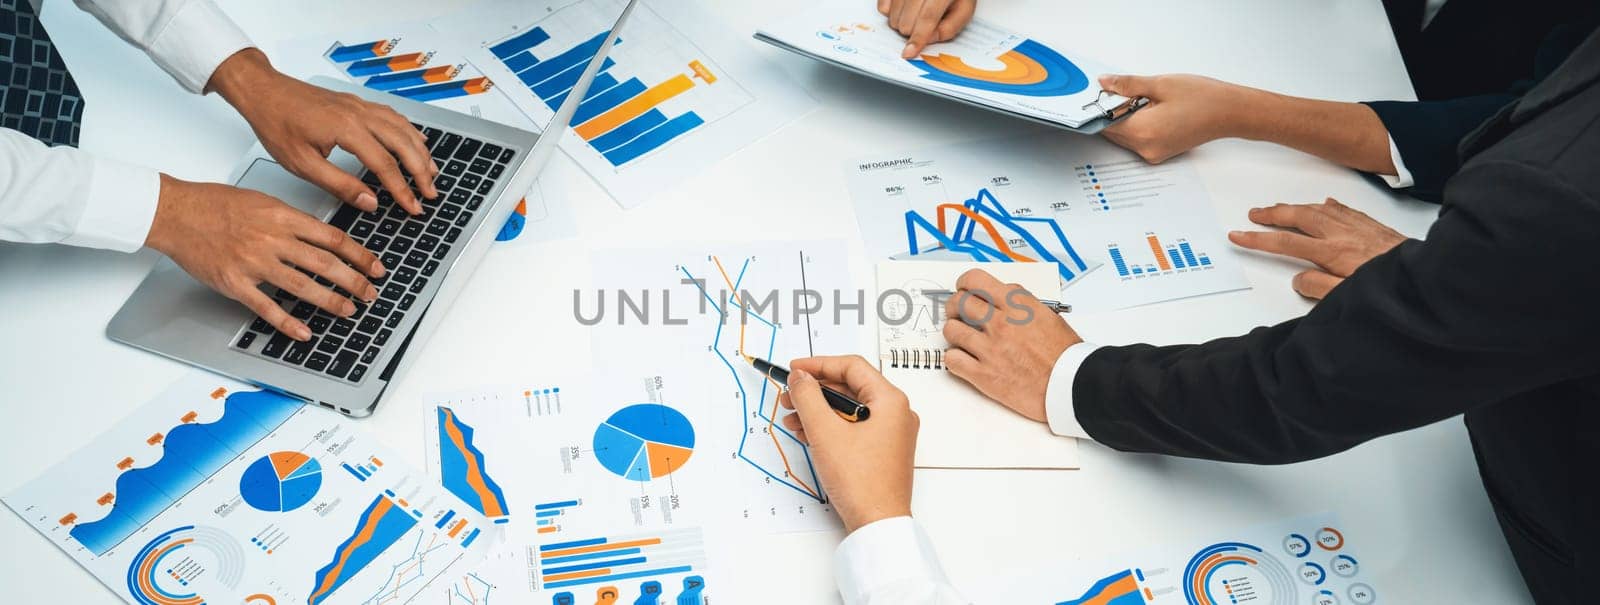 Business people group meeting share idea discuss report for profit oratory by biancoblue